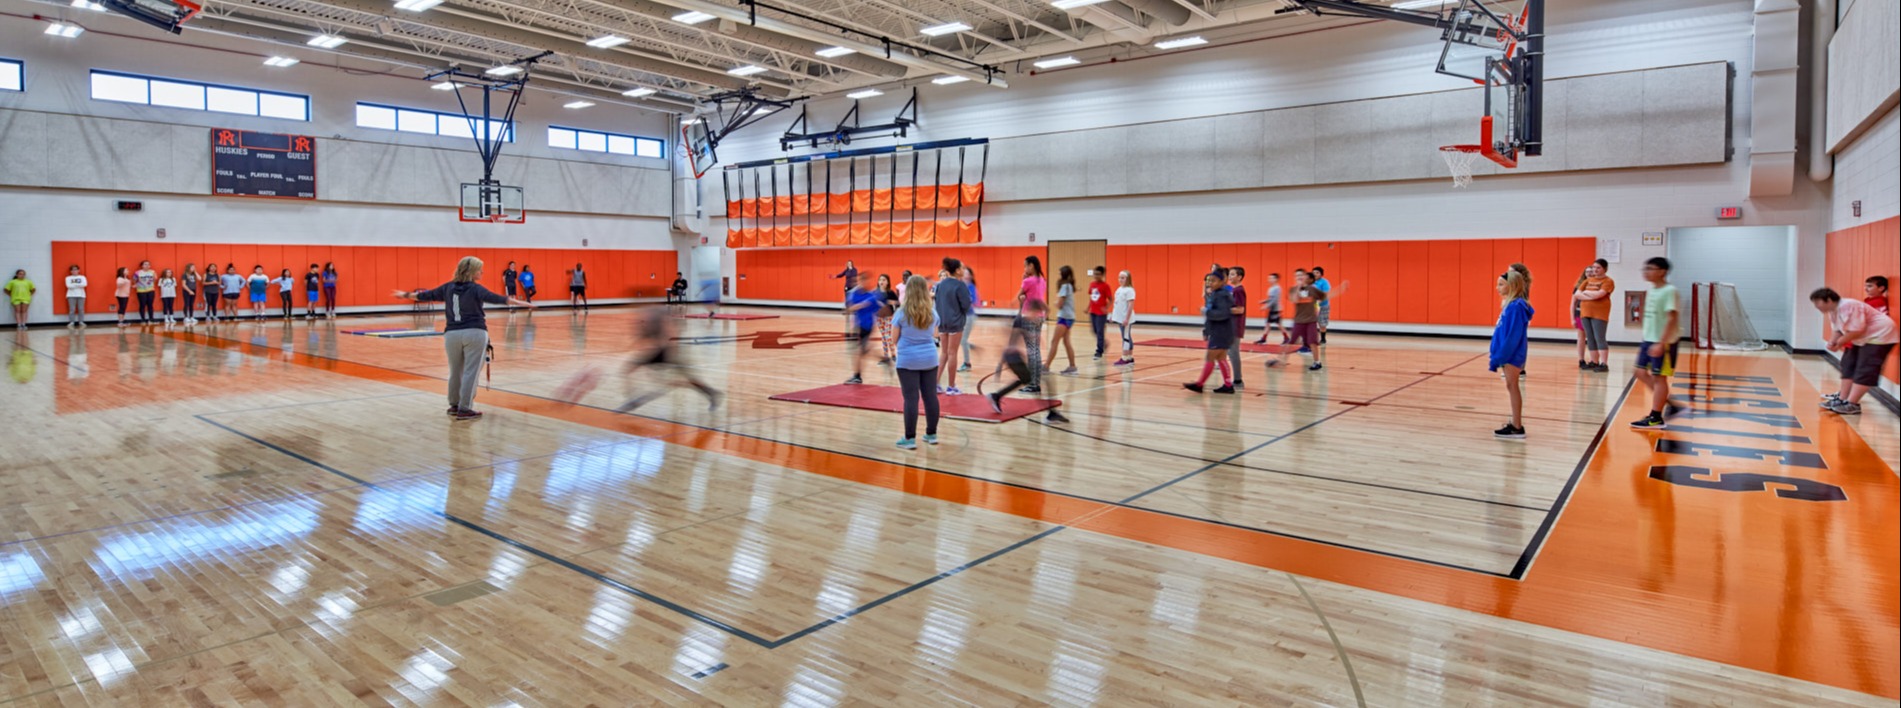 students play in a gym